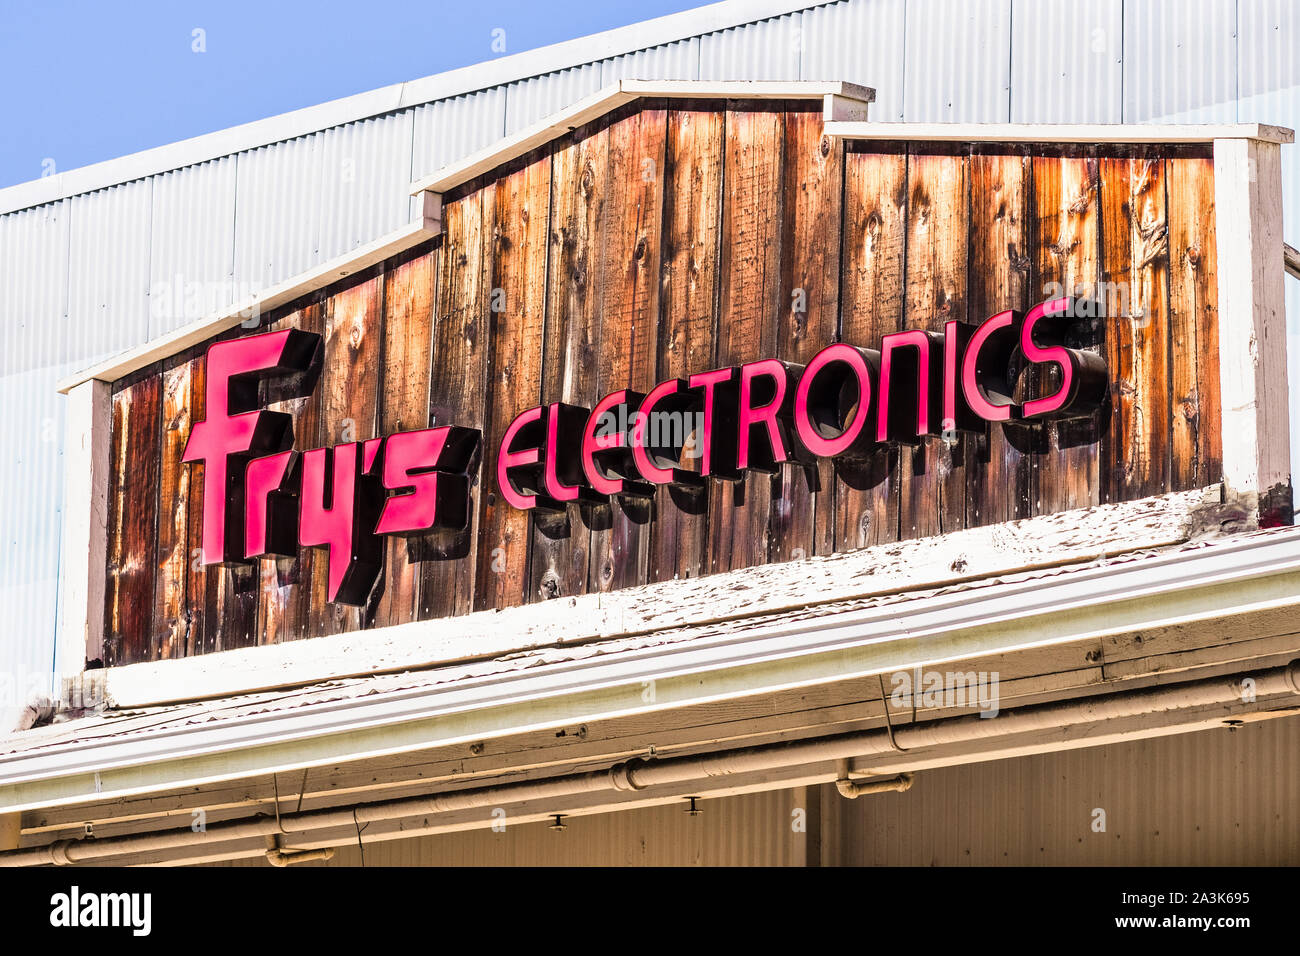 Oct 7, 2019 Palo Alto / CA / USA - Fry's Electronics store front, with a Wild West theme; Fry's is an American retailer of software, consumer electron Stock Photo